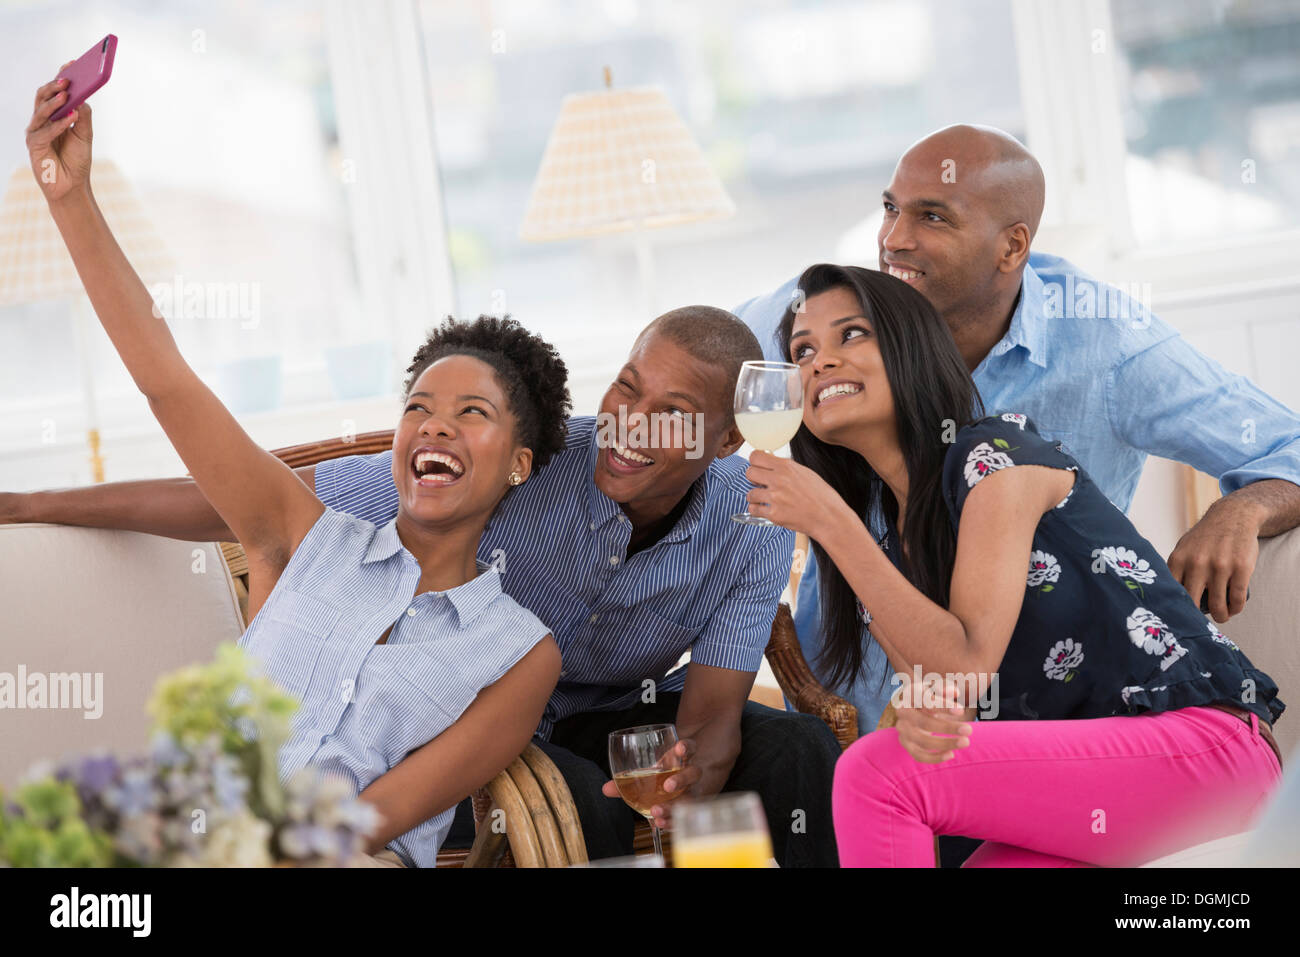 Office event. A woman taking a selfie of the group with a pink smart phone. Stock Photo